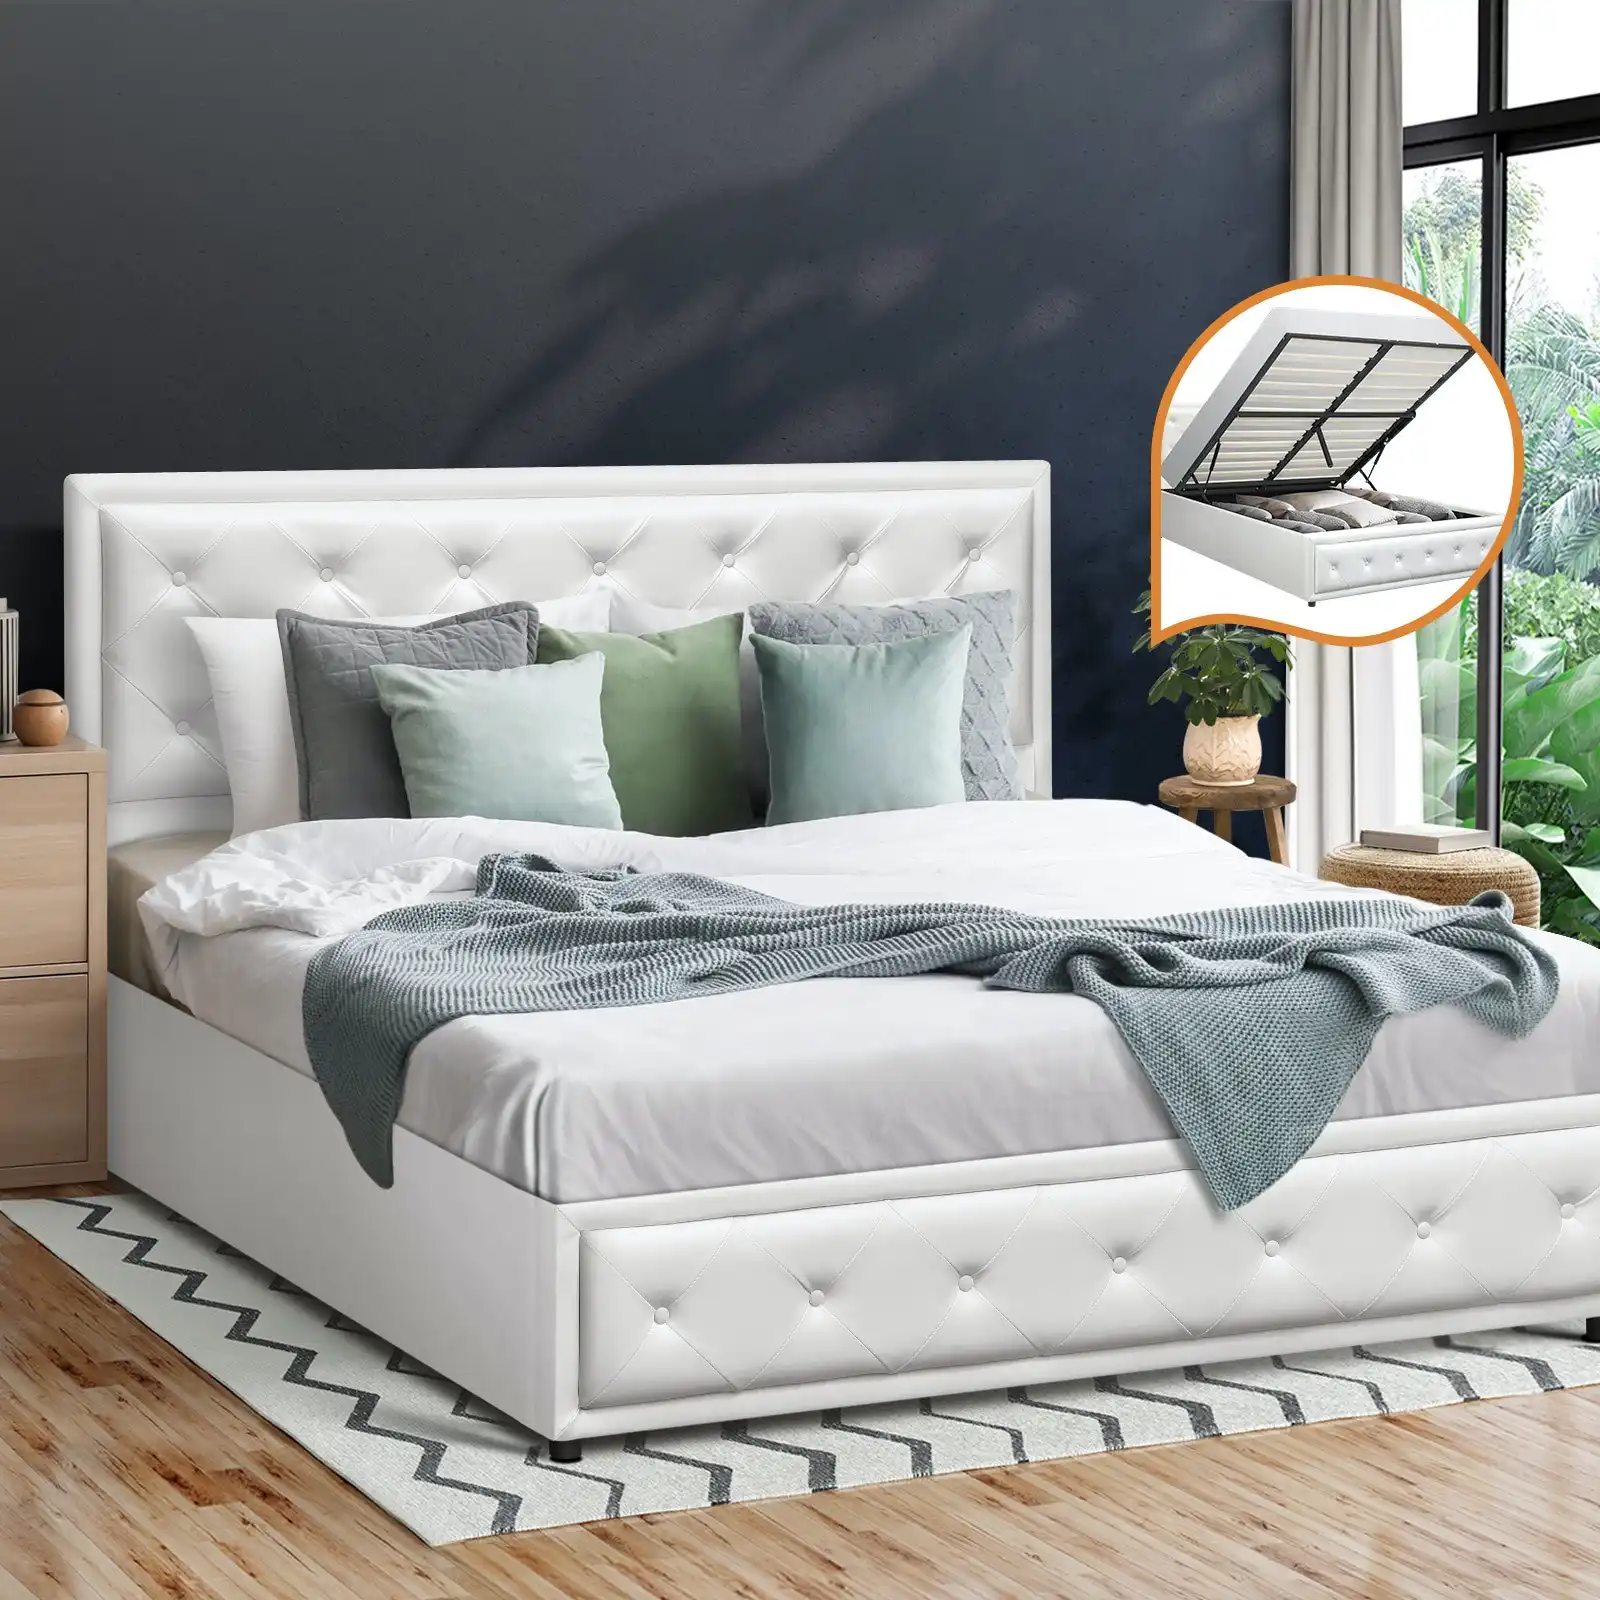 Oikiture Bed Frame Double Size Gas Lift Base With Storage White Leather